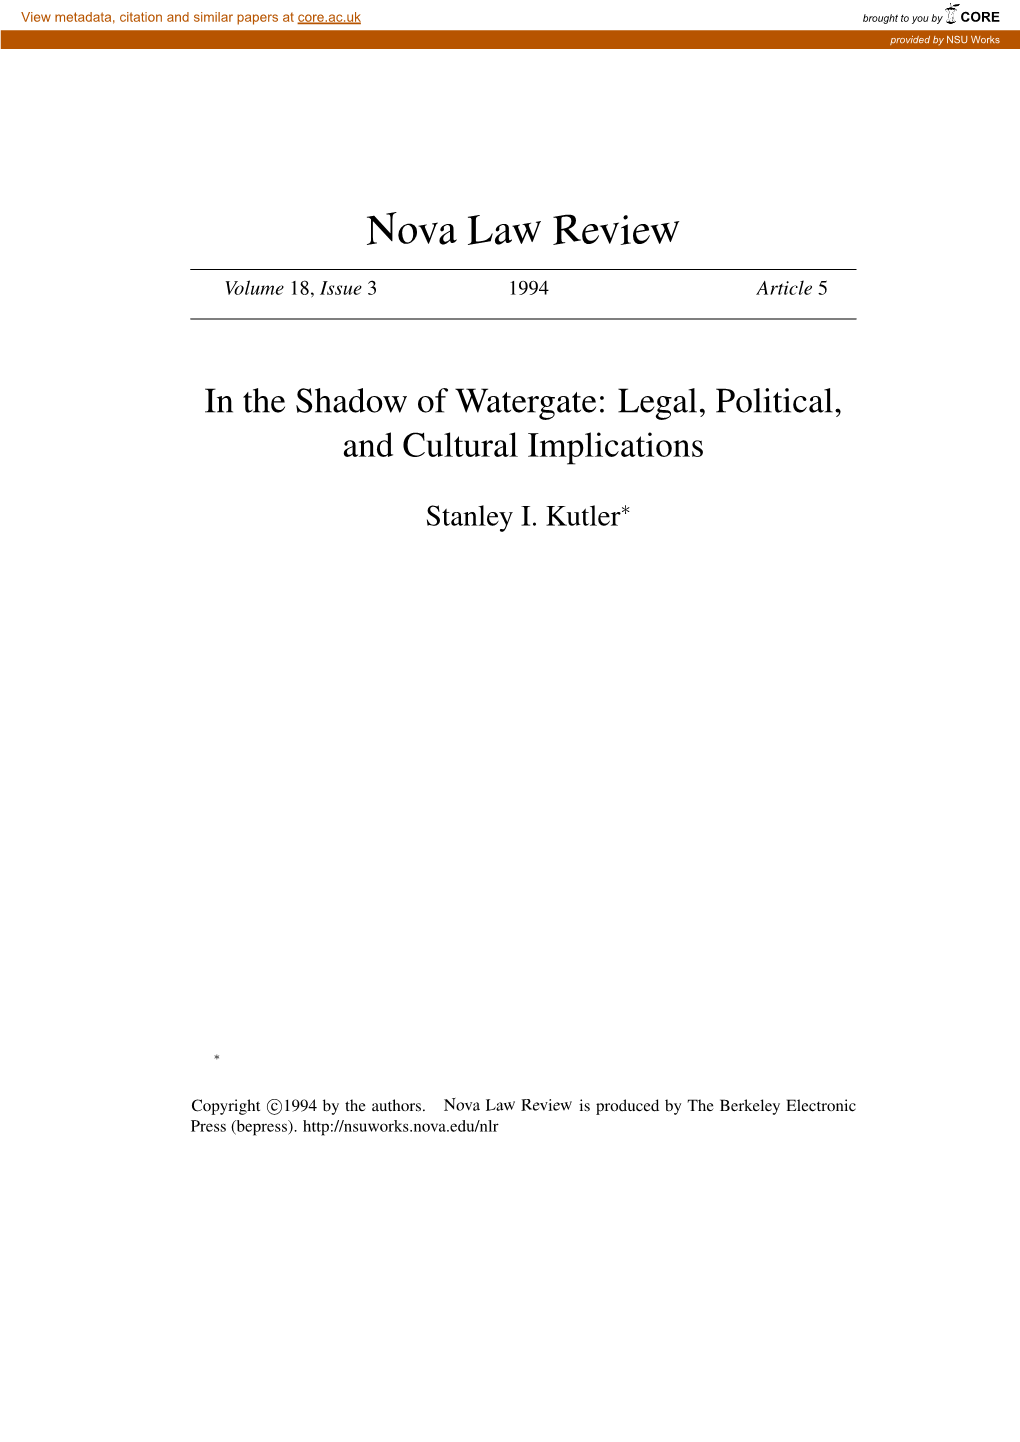 In the Shadow of Watergate: Legal, Political, and Cultural Implications